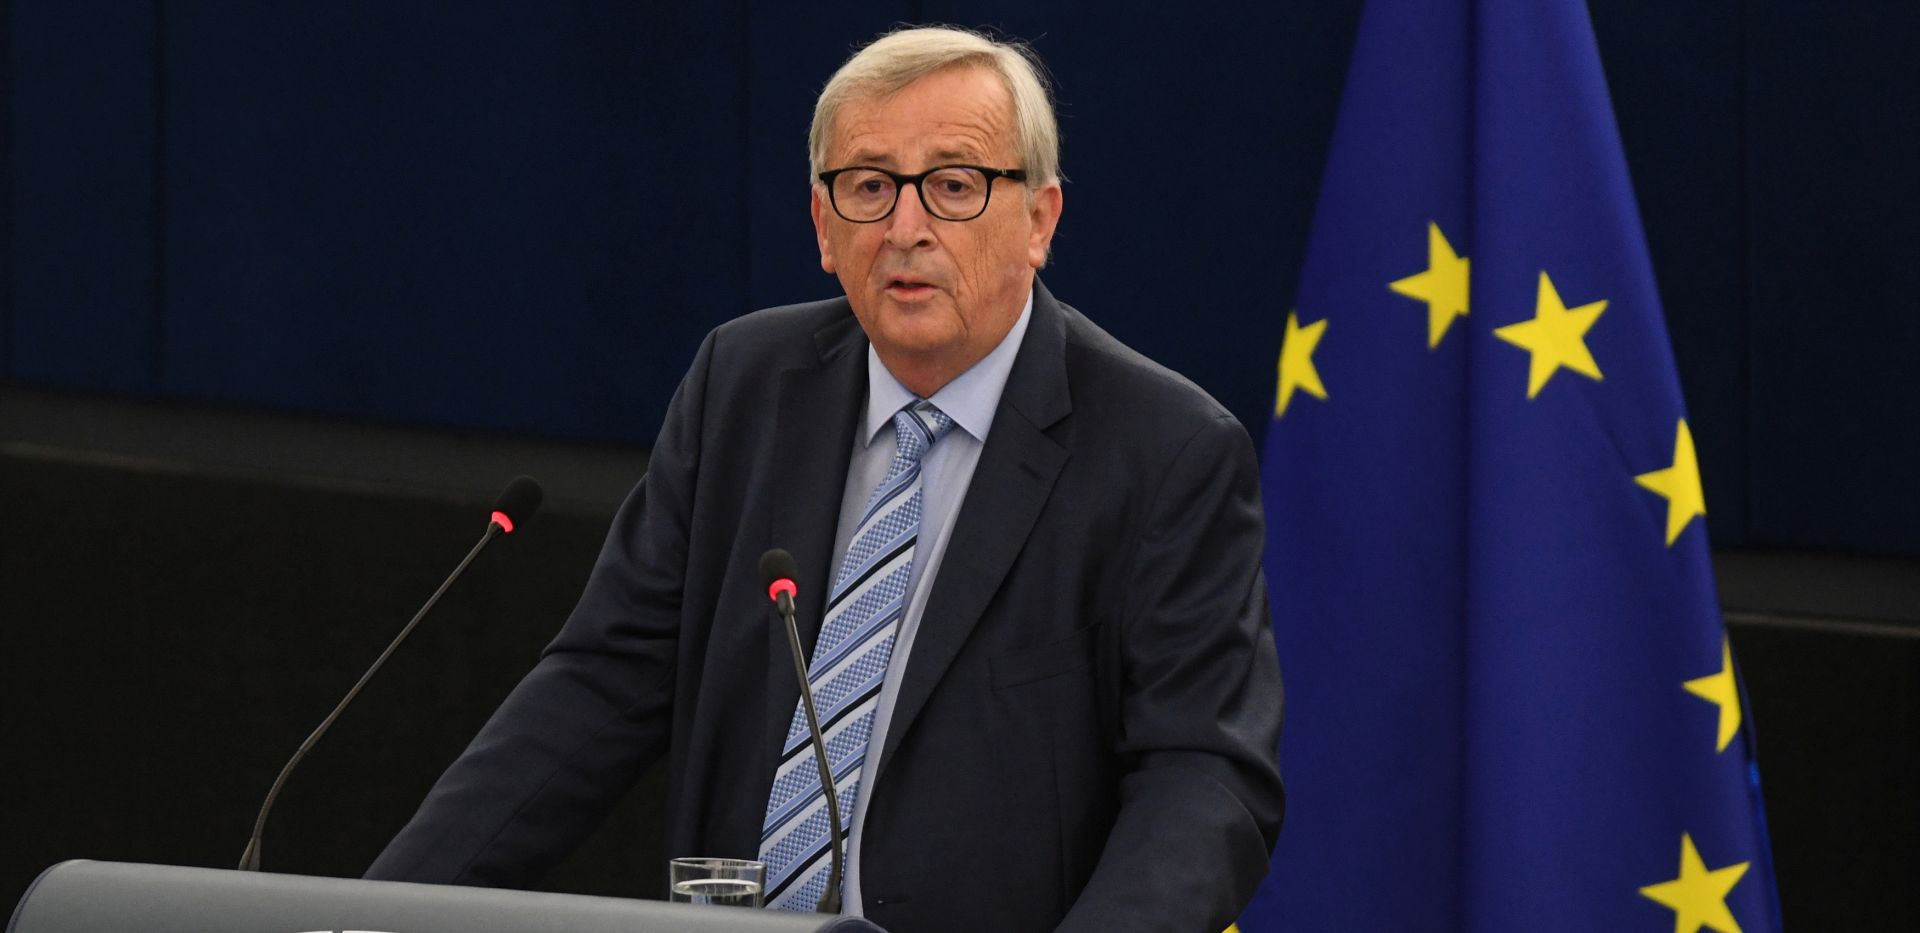 epa07940057 Jean-Claude Juncker, President of the European Commission, delivers his speech at the Review of the Juncker Commission at the European Parliament in Strasbourg, France, 22 October 2019.  EPA/PATRICK SEEGER